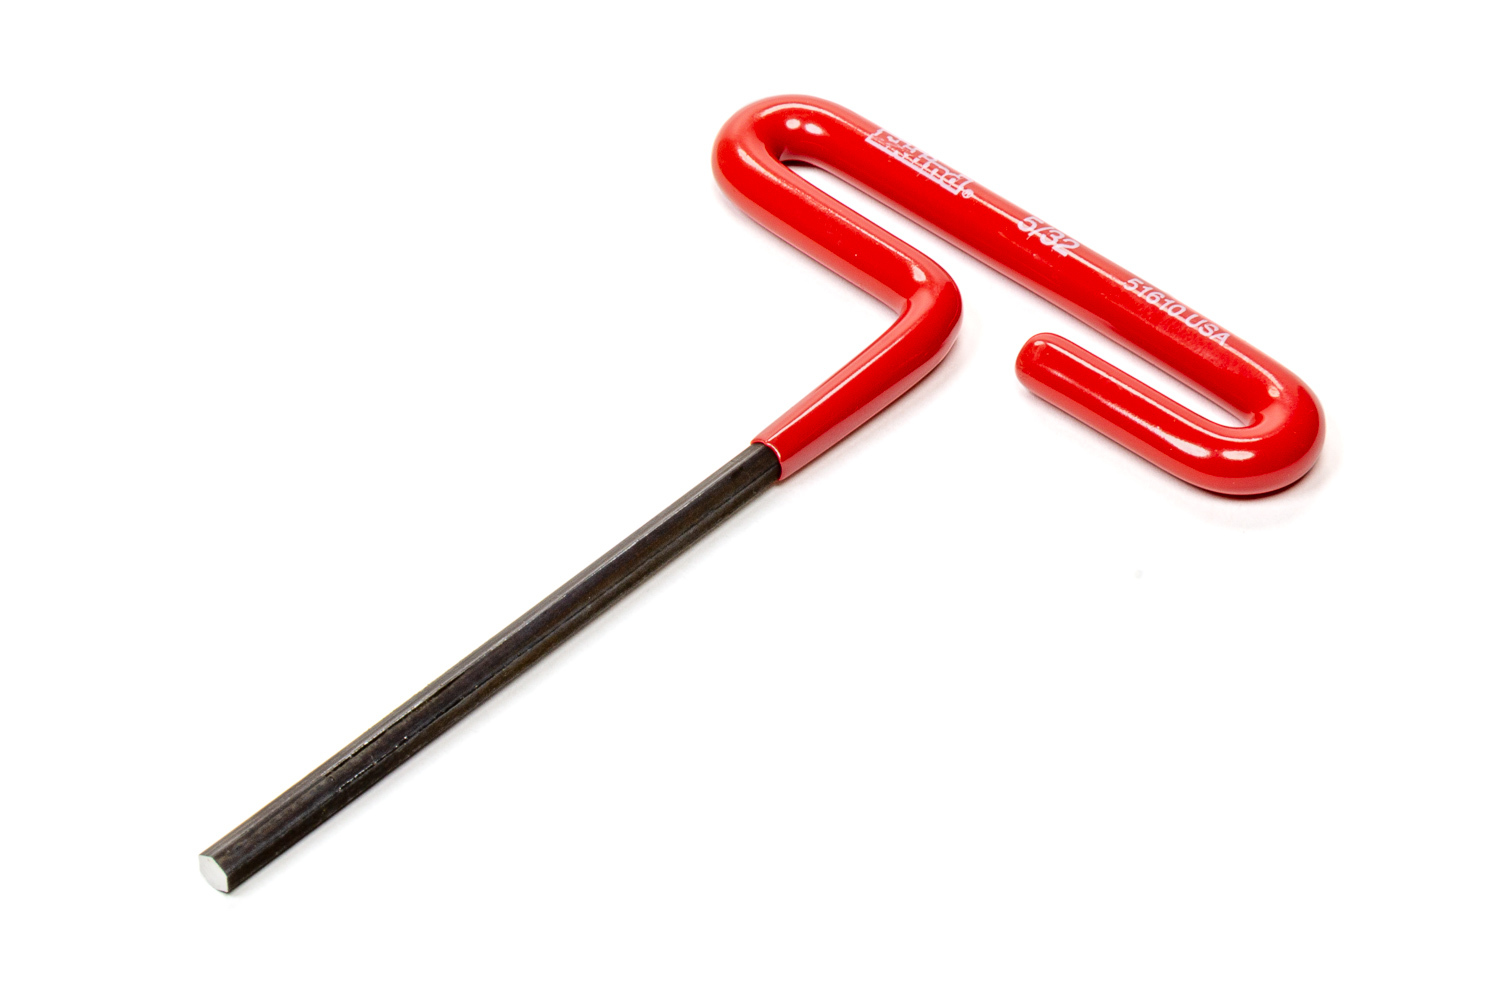 LSM Racing Products 1T-5/32 Allen Wrench, T-Handle, 5/32 in Hex, Plastic / Steel, Black / Red Oxide, Each